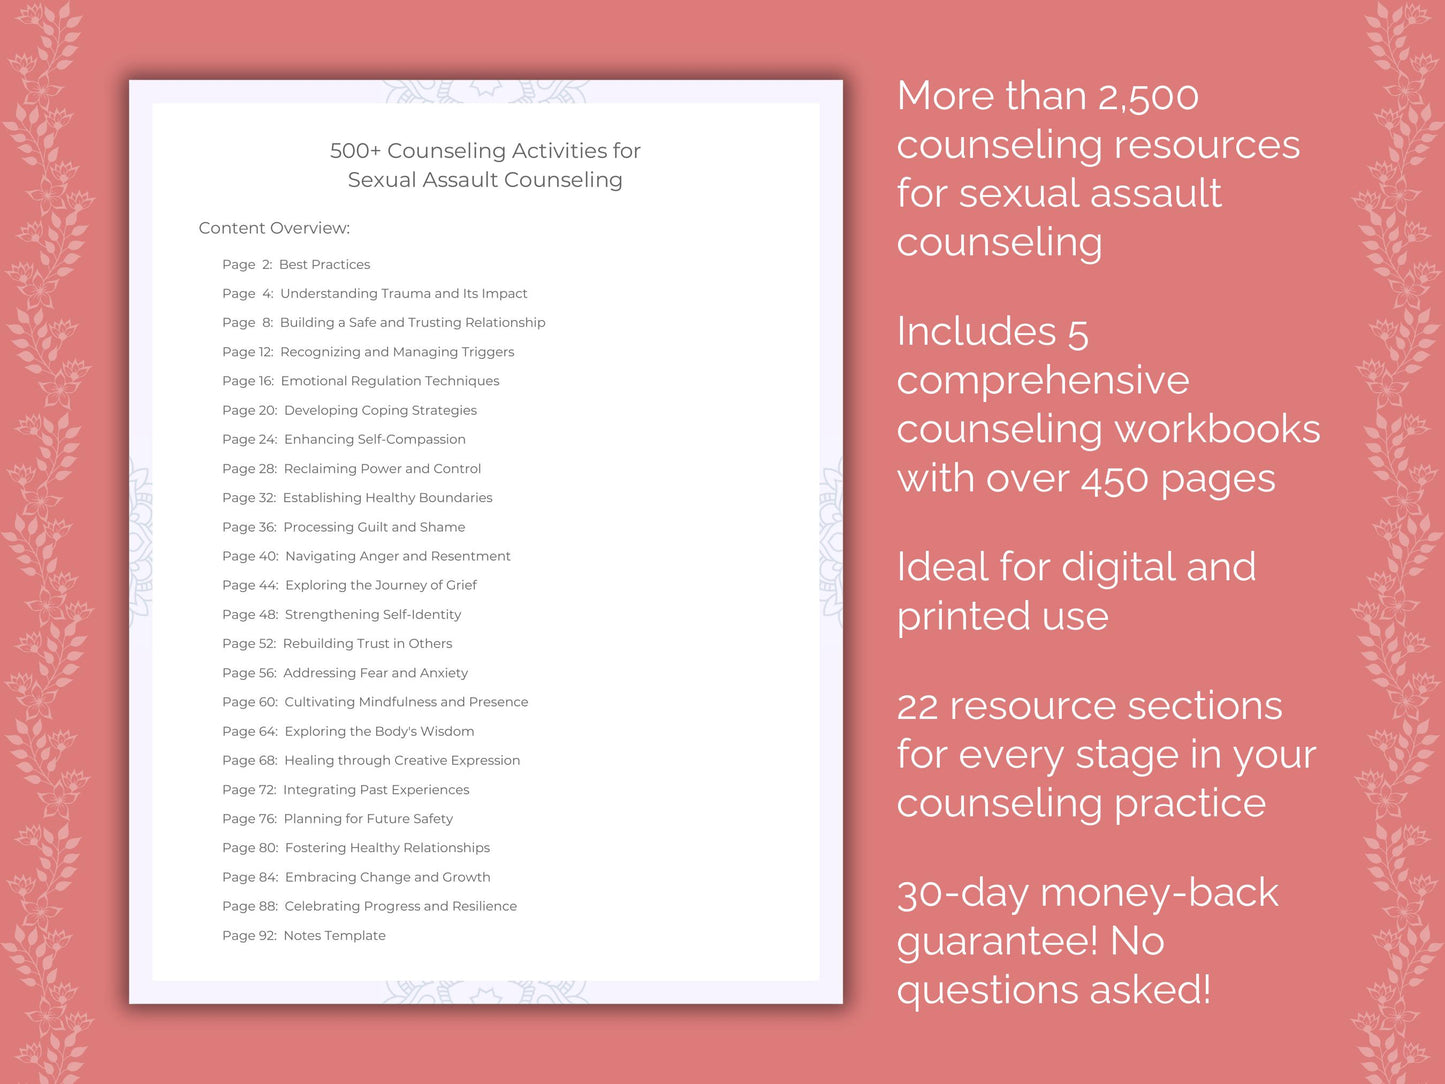 Counseling, Worksheet, Therapist, Resource, Counselor, Sexual Assault Idea, Template, Sexual Assault, Workbook, Therapy, Content, Mental Health, Sexual Assault Tool